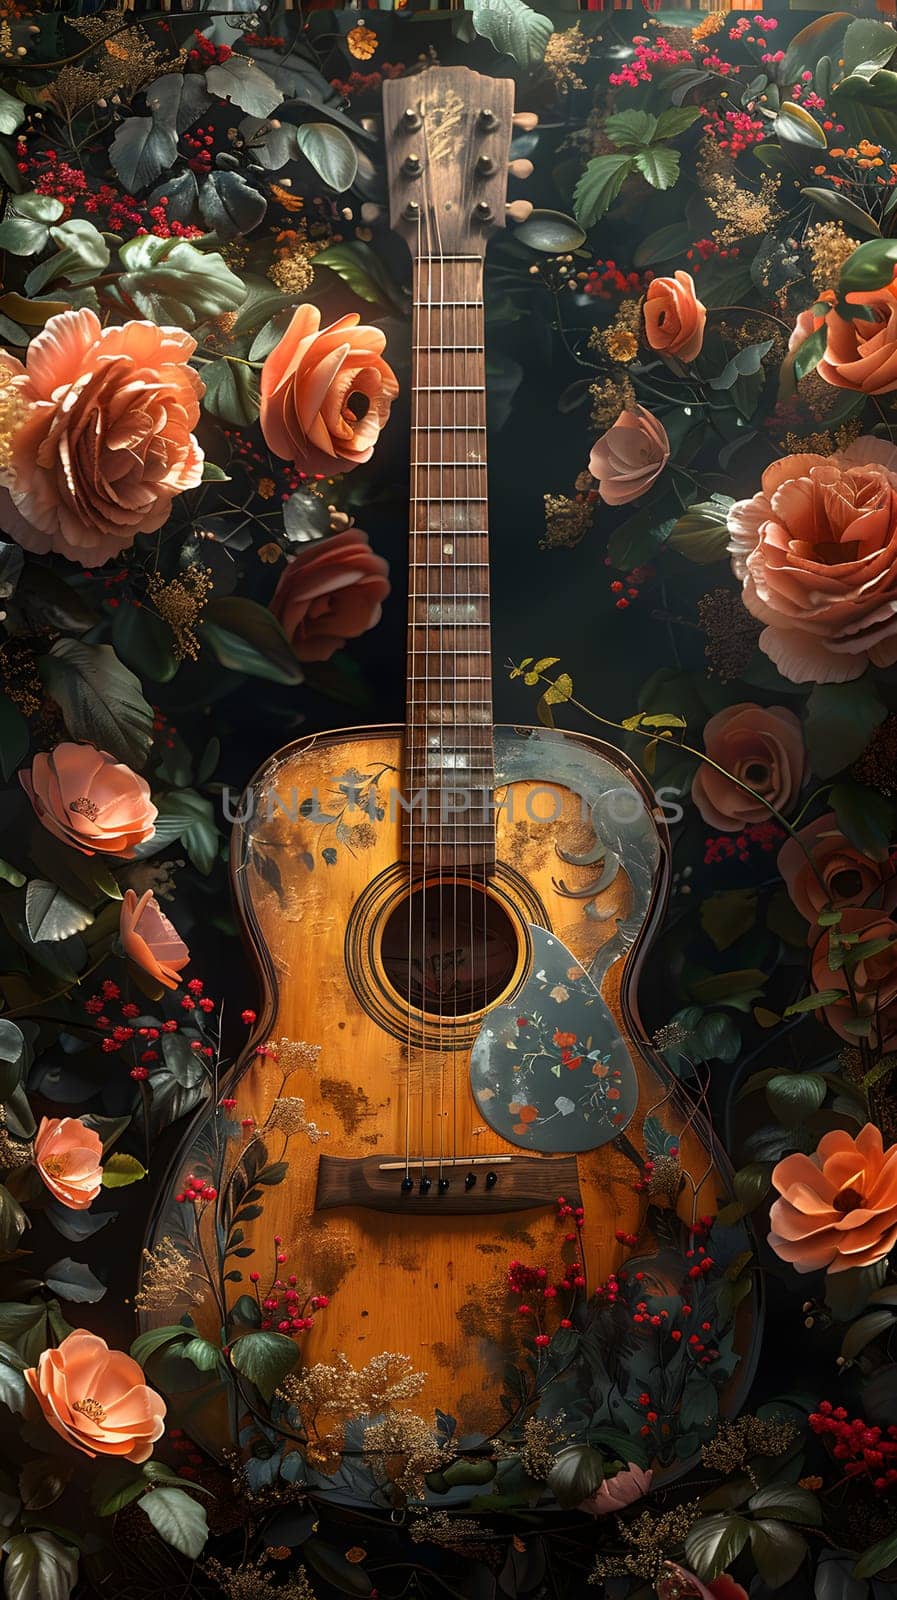 Musical instrument Guitar surrounded by roses in a garden by Nadtochiy